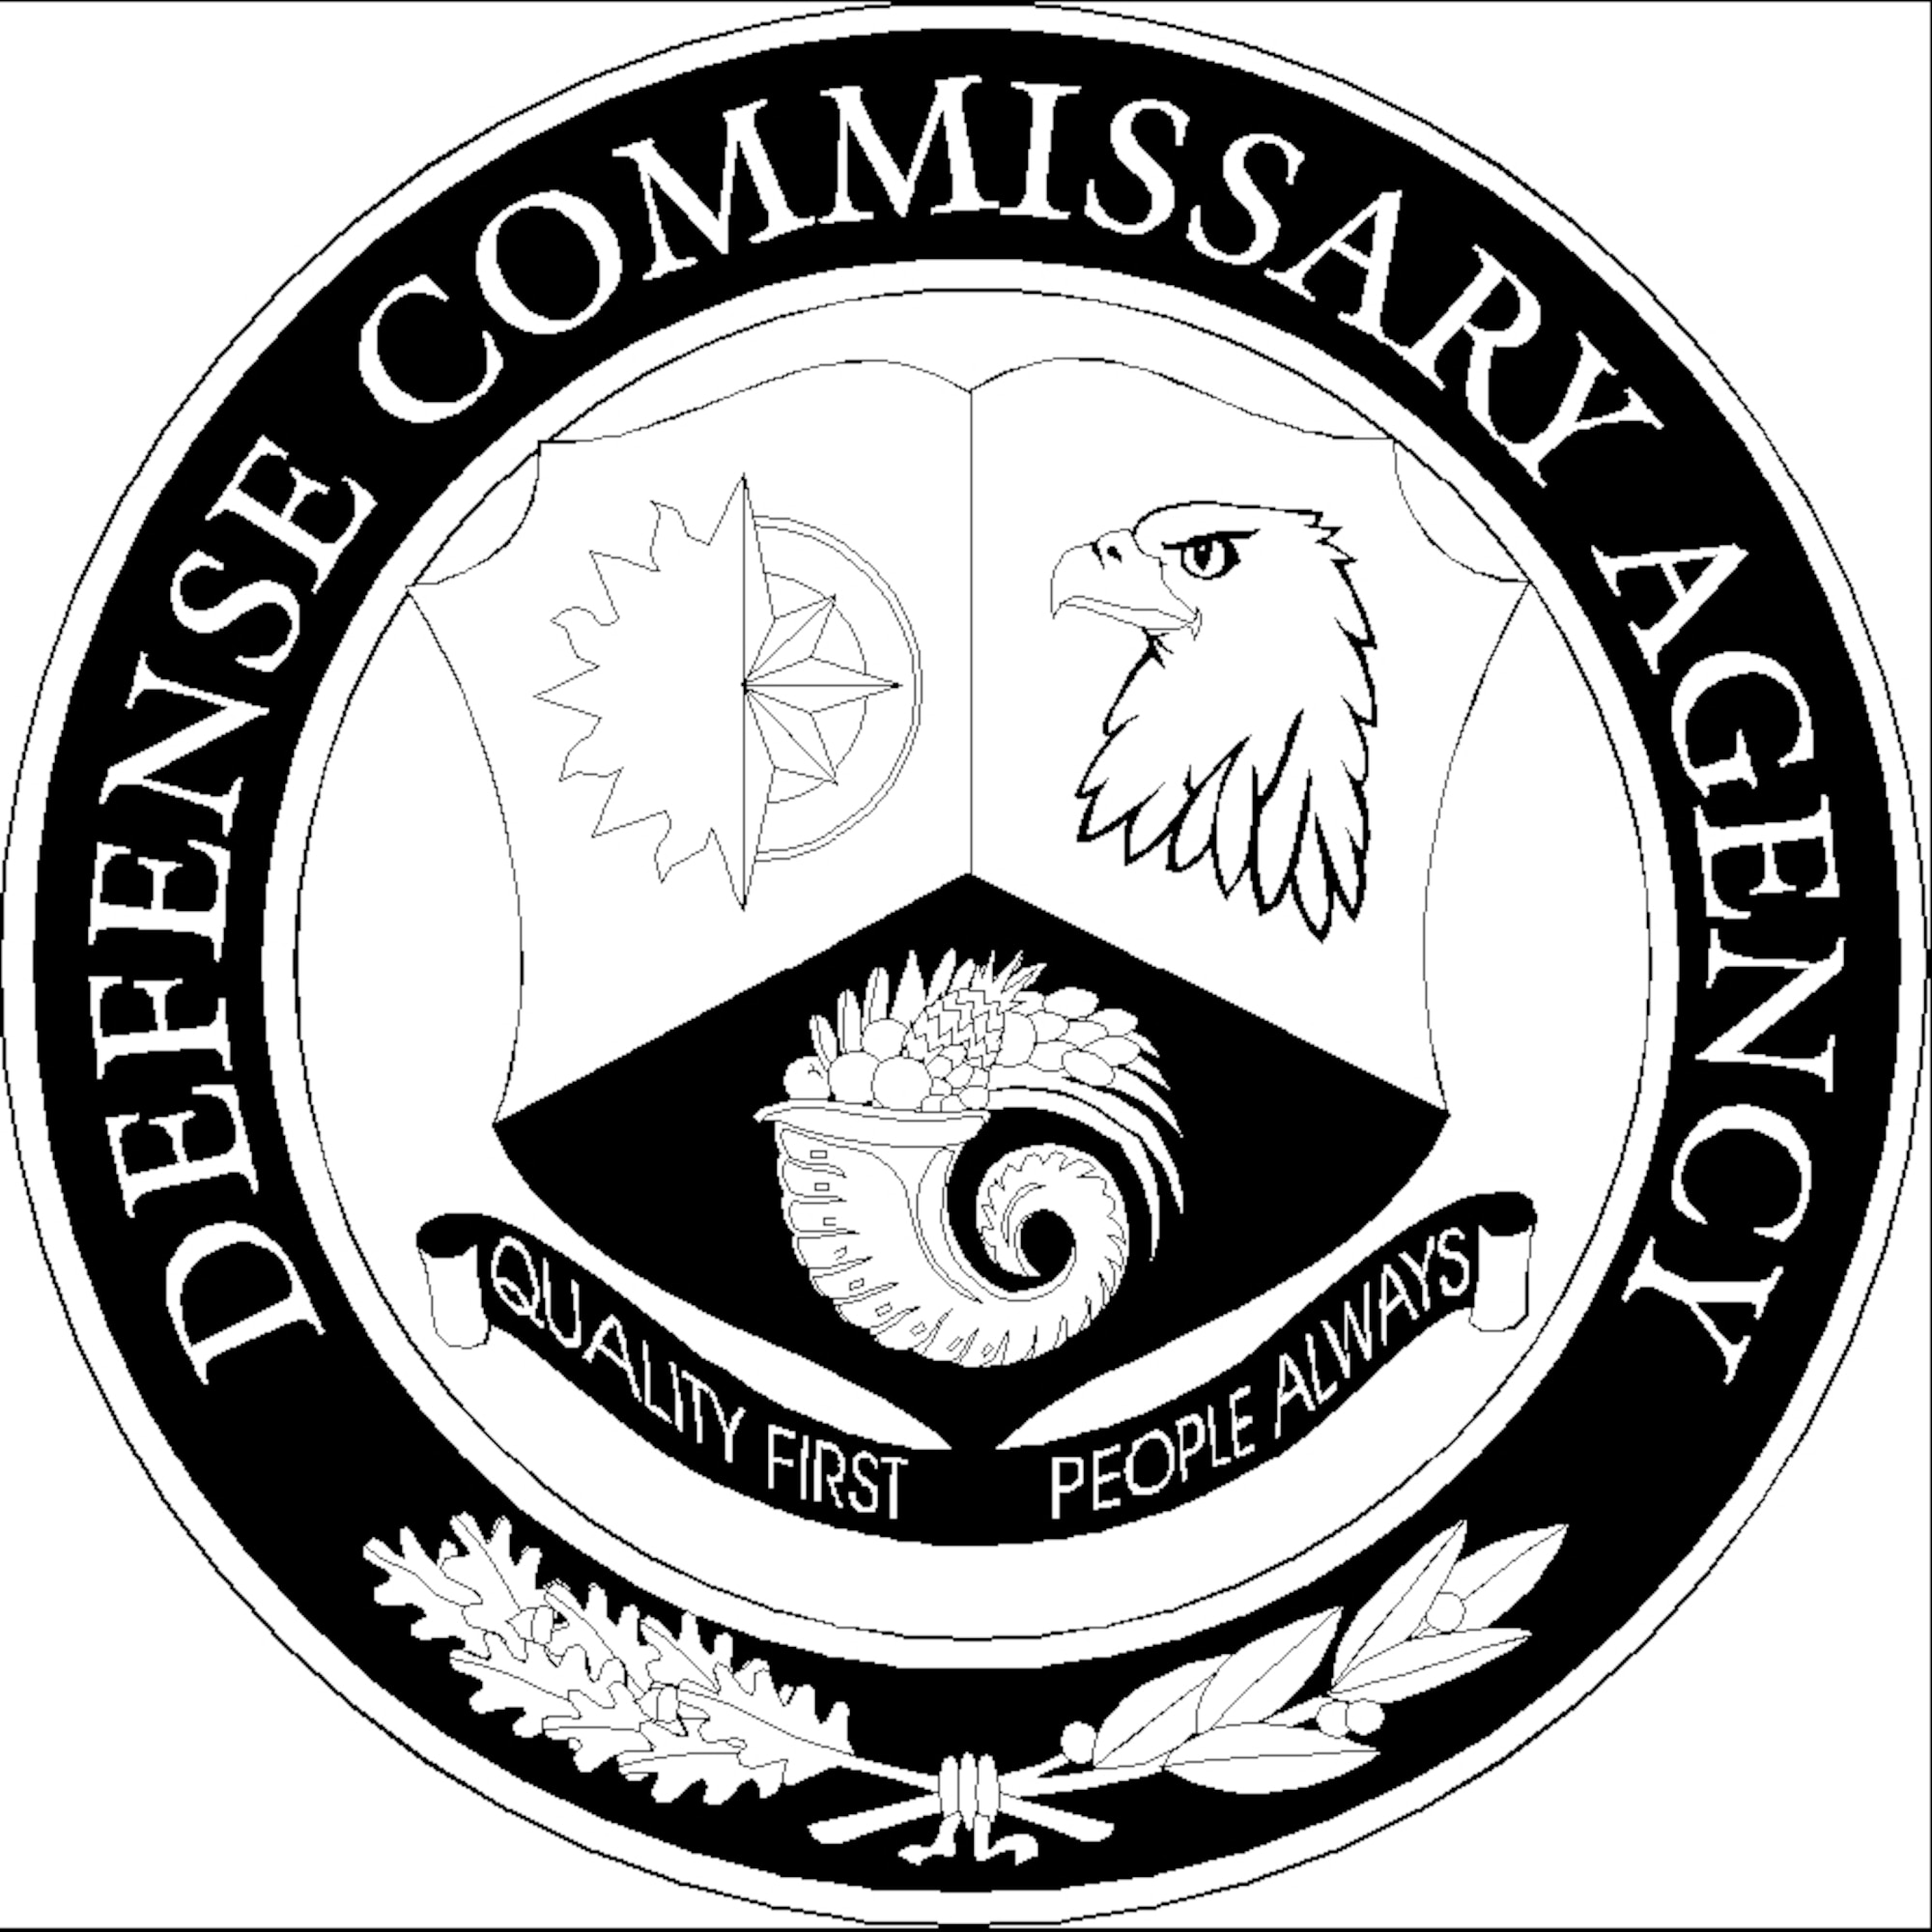 The Defense Commissary Agency emblem. (Courtesy graphic)